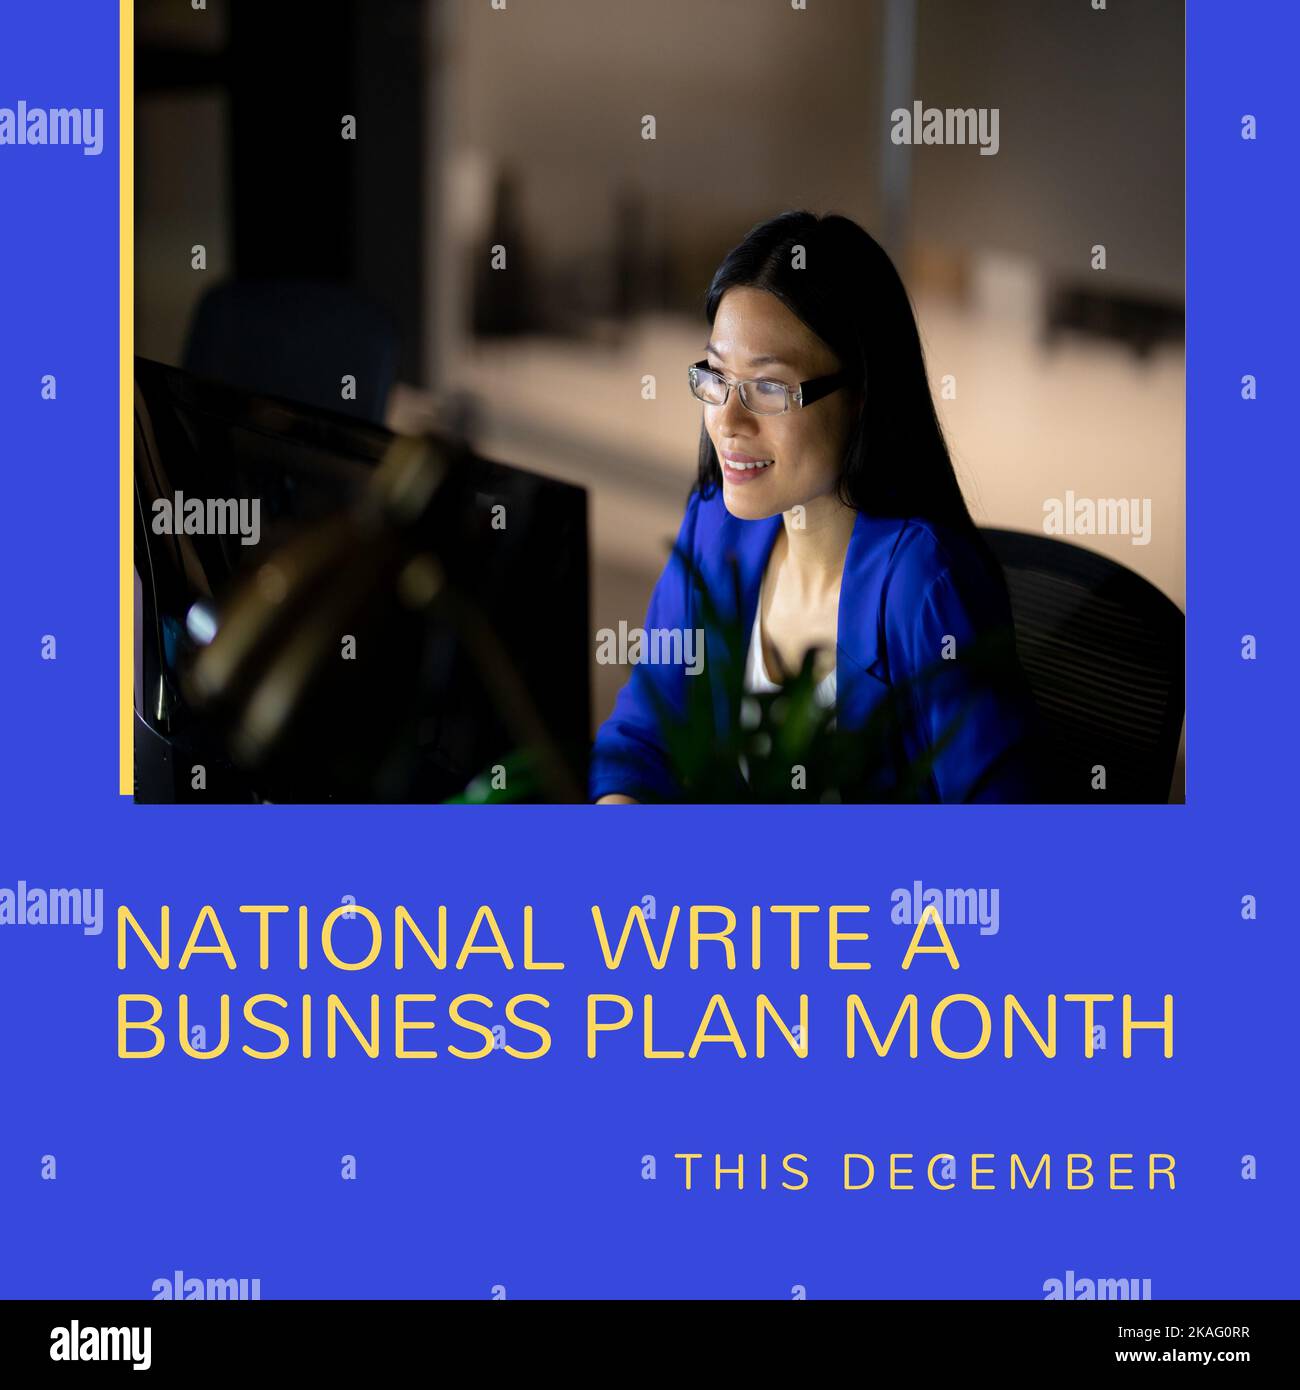 Square image of write a business plan month text businesswomen picture over blue background Stock Photo